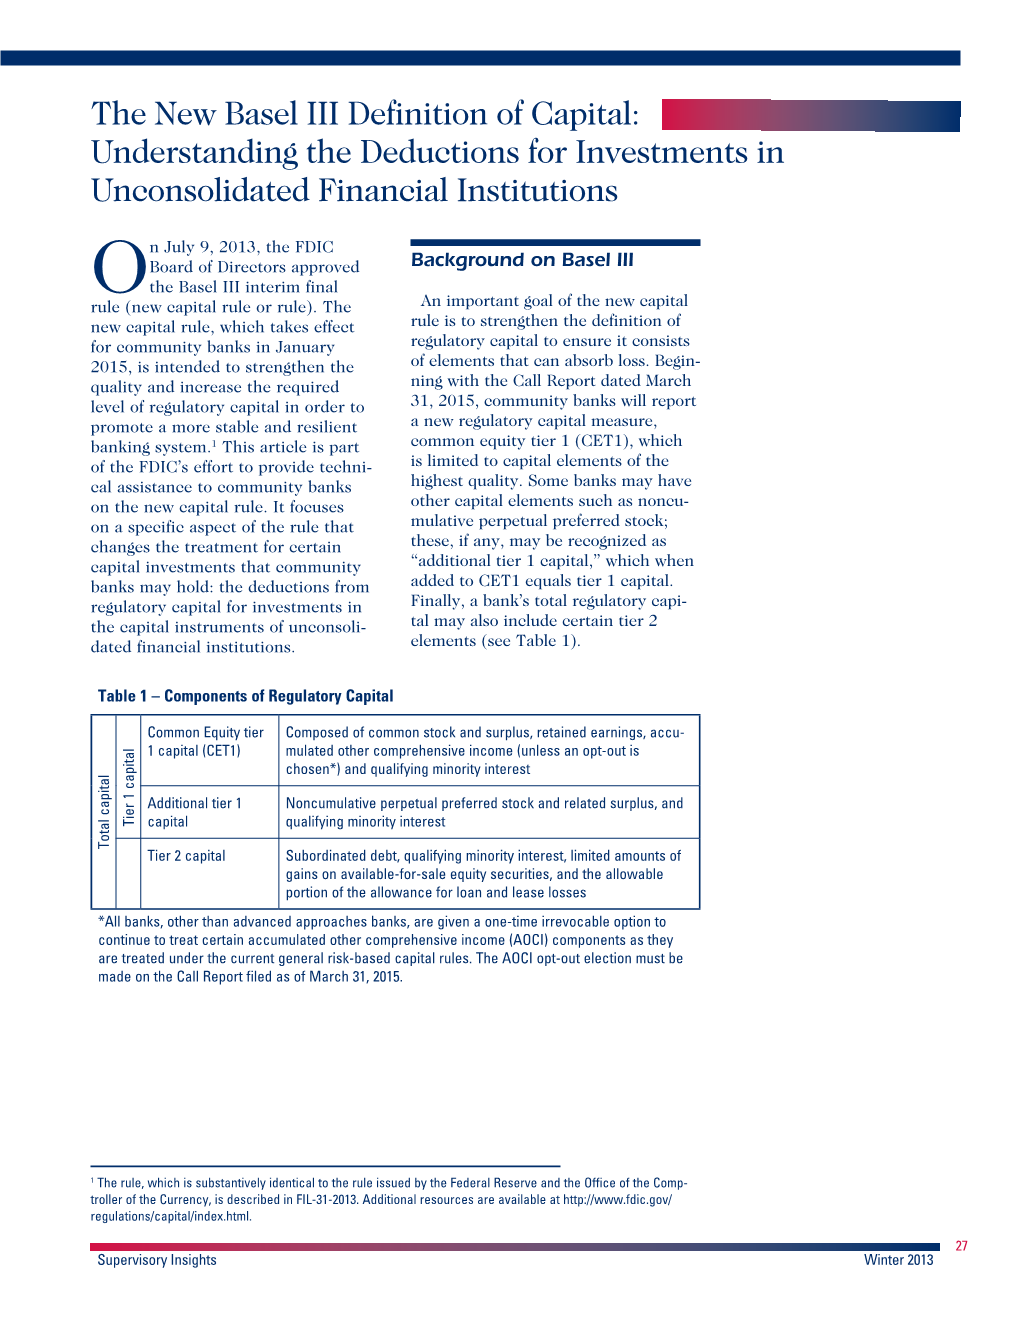 The New Basel III Definition of Capital: Understanding the Deductions for Investments in Unconsolidated Financial Institutions